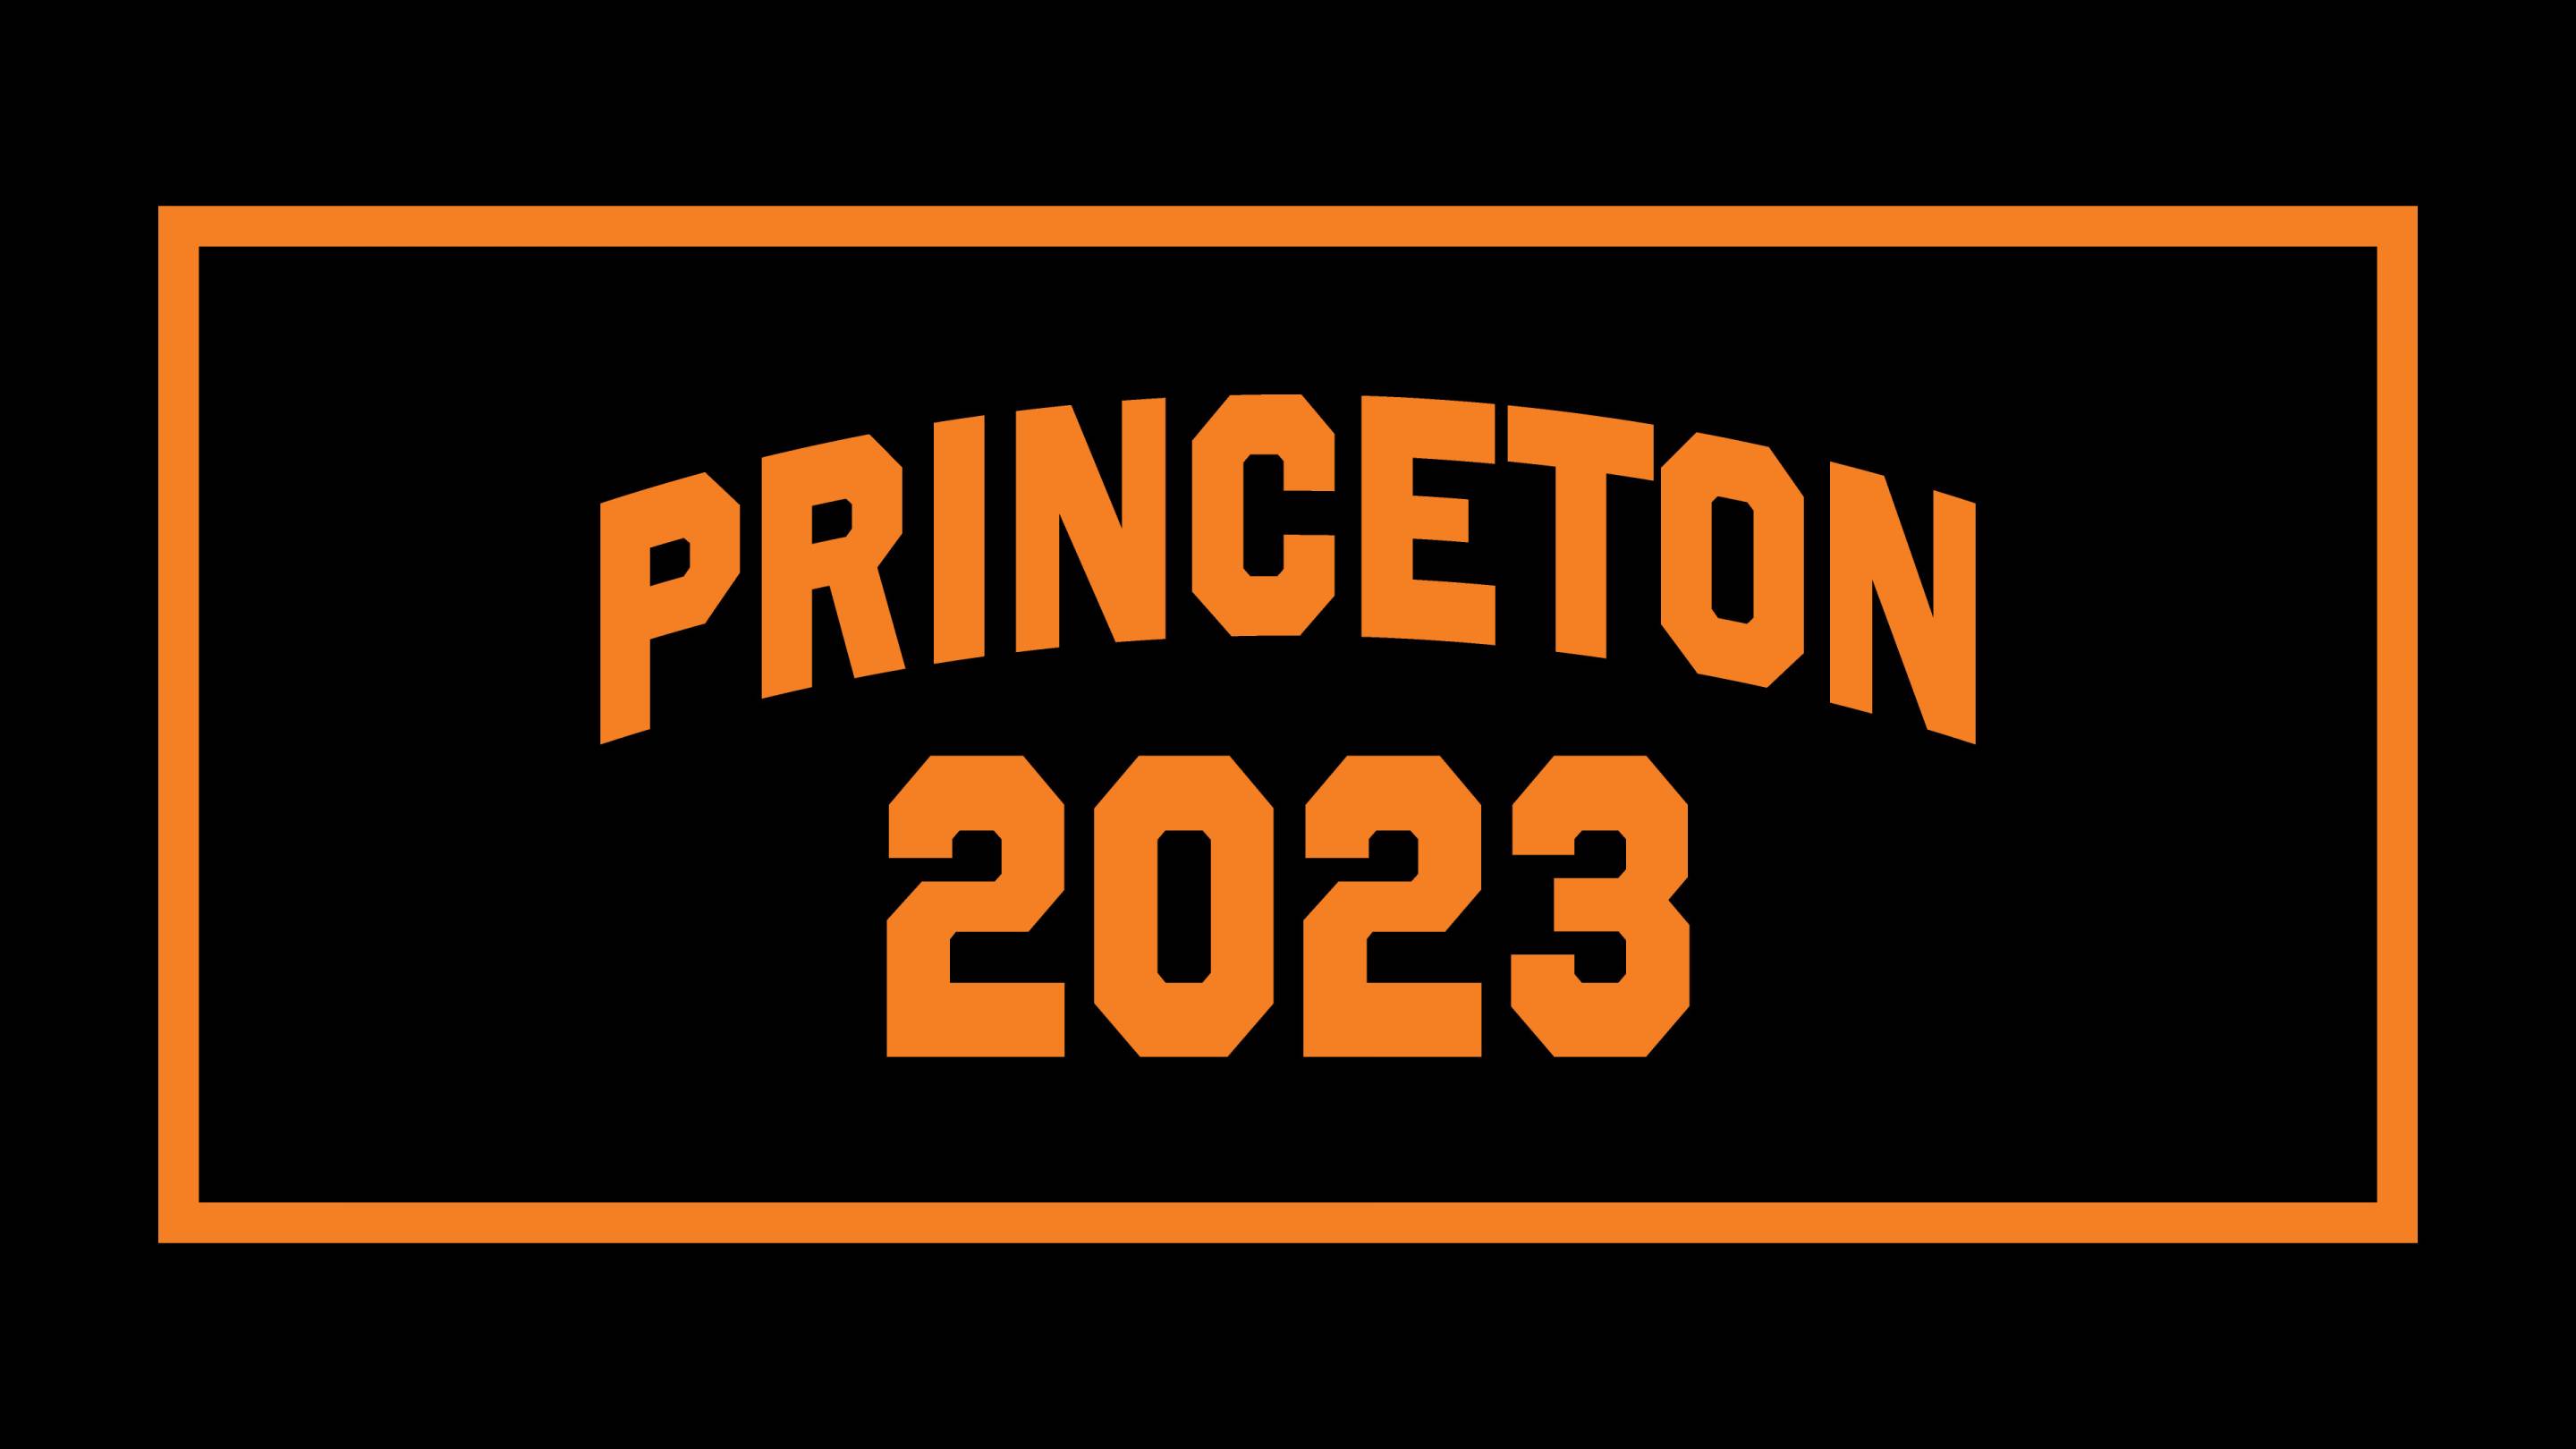 Princeton offers early action admission to 743 students for Class of 2023